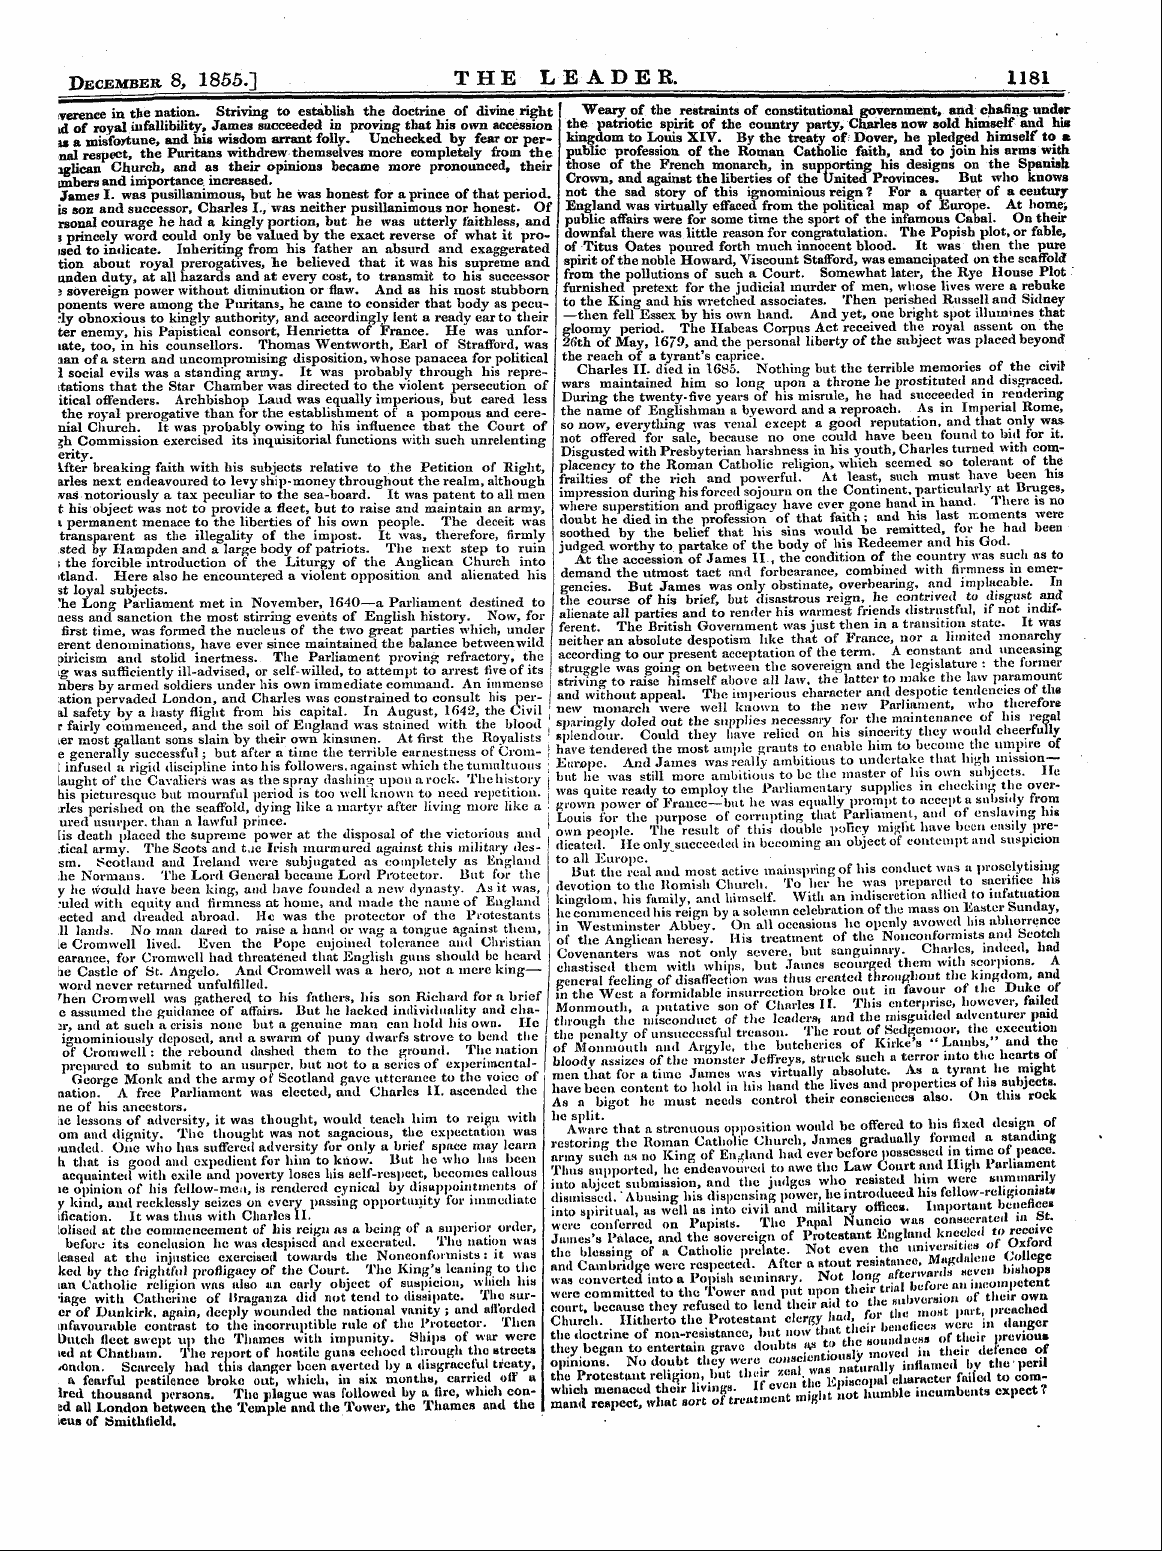 Leader (1850-1860): jS F Y, 1st edition: 17